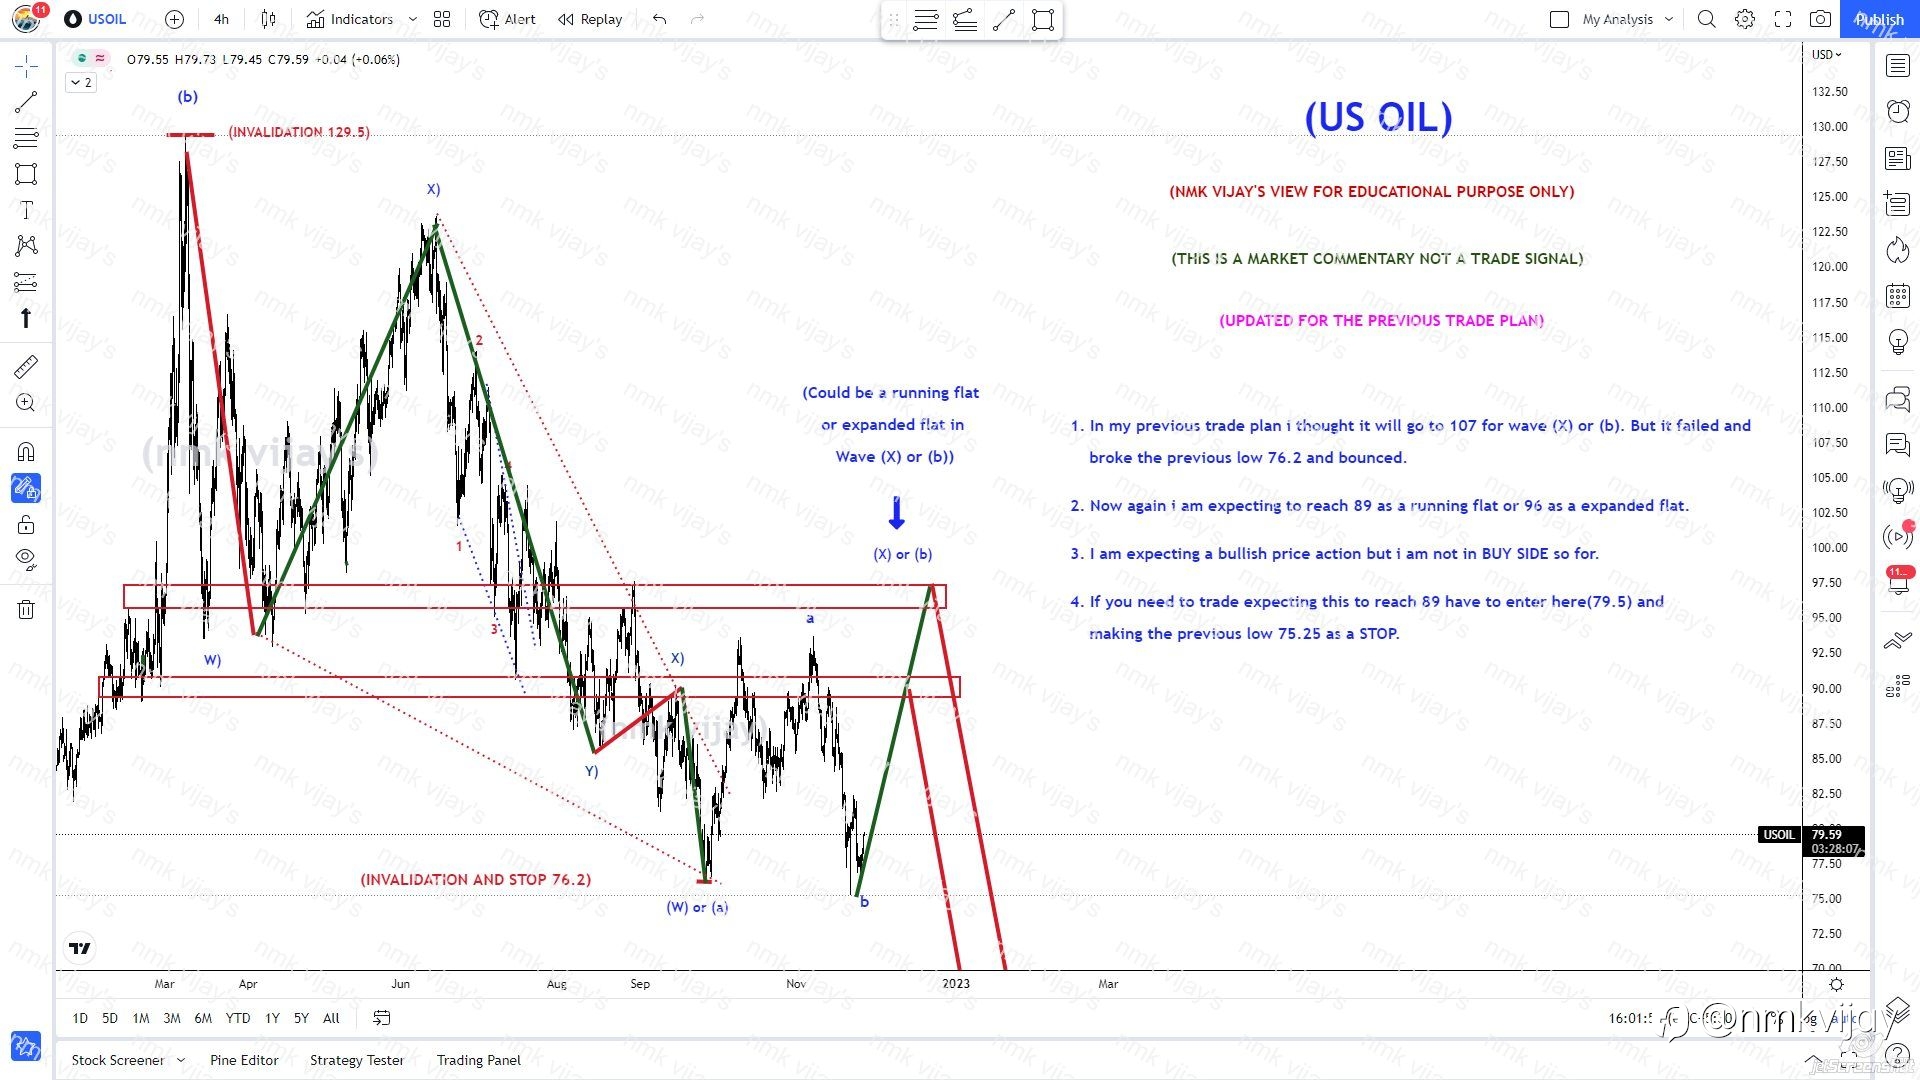 USOIL-Wave (X) or (b) looking for a Running or Expanded flat.